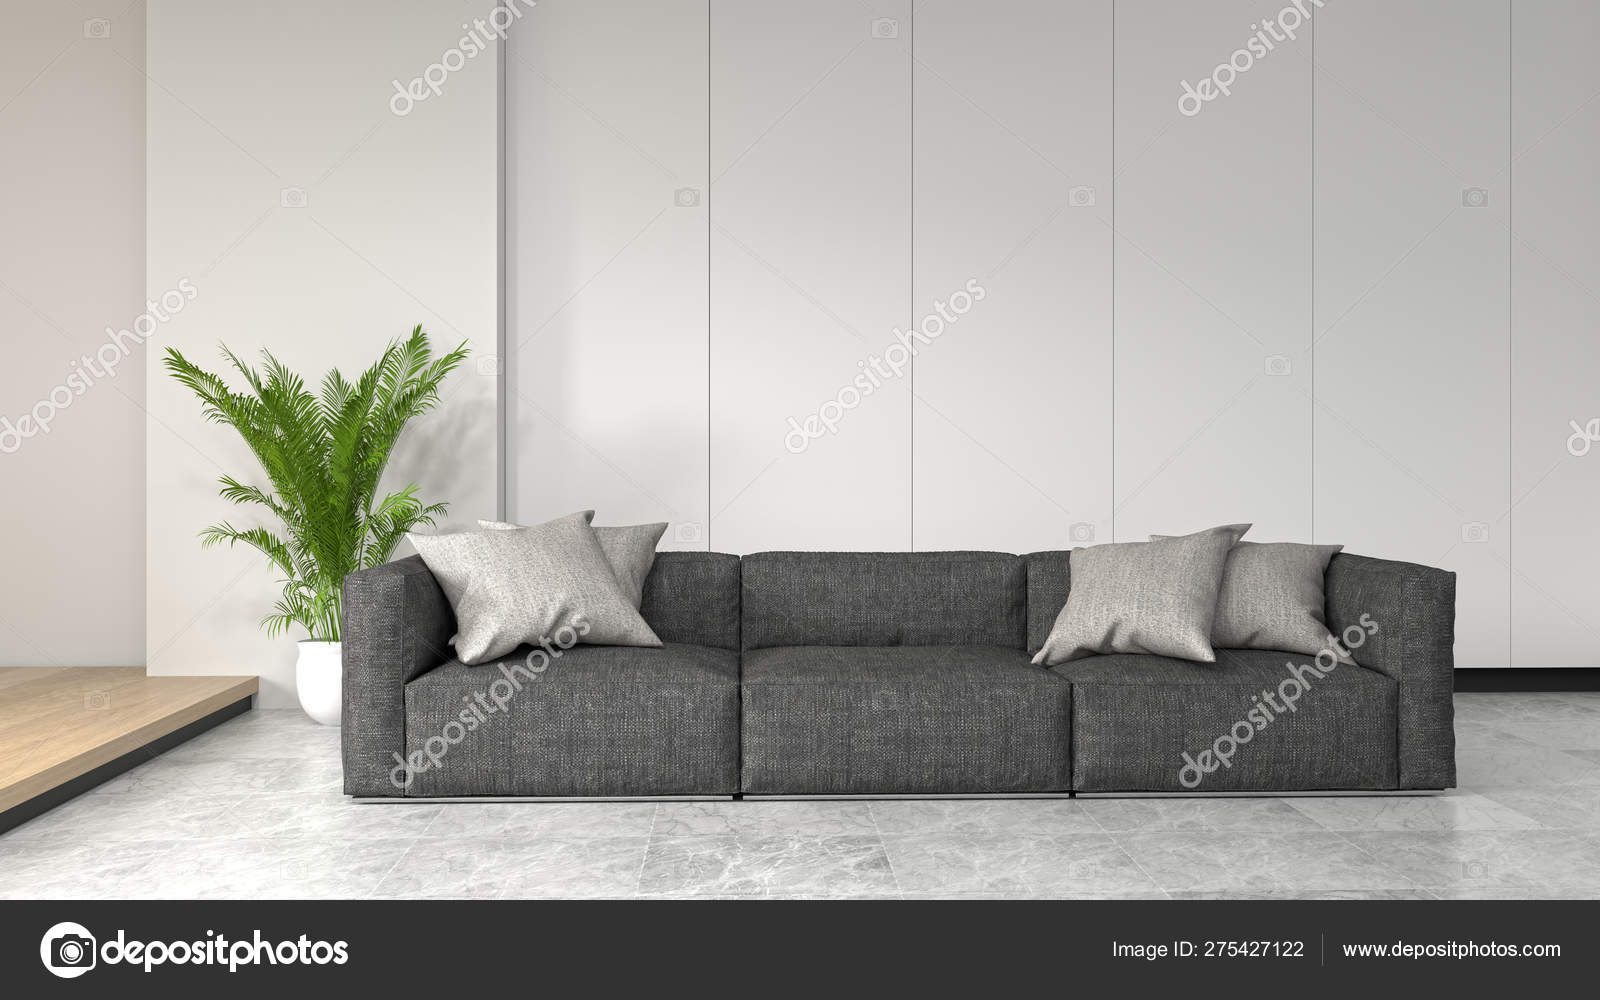 Sofa Front Simple White Wall Decorative Items Empty Room Open ...